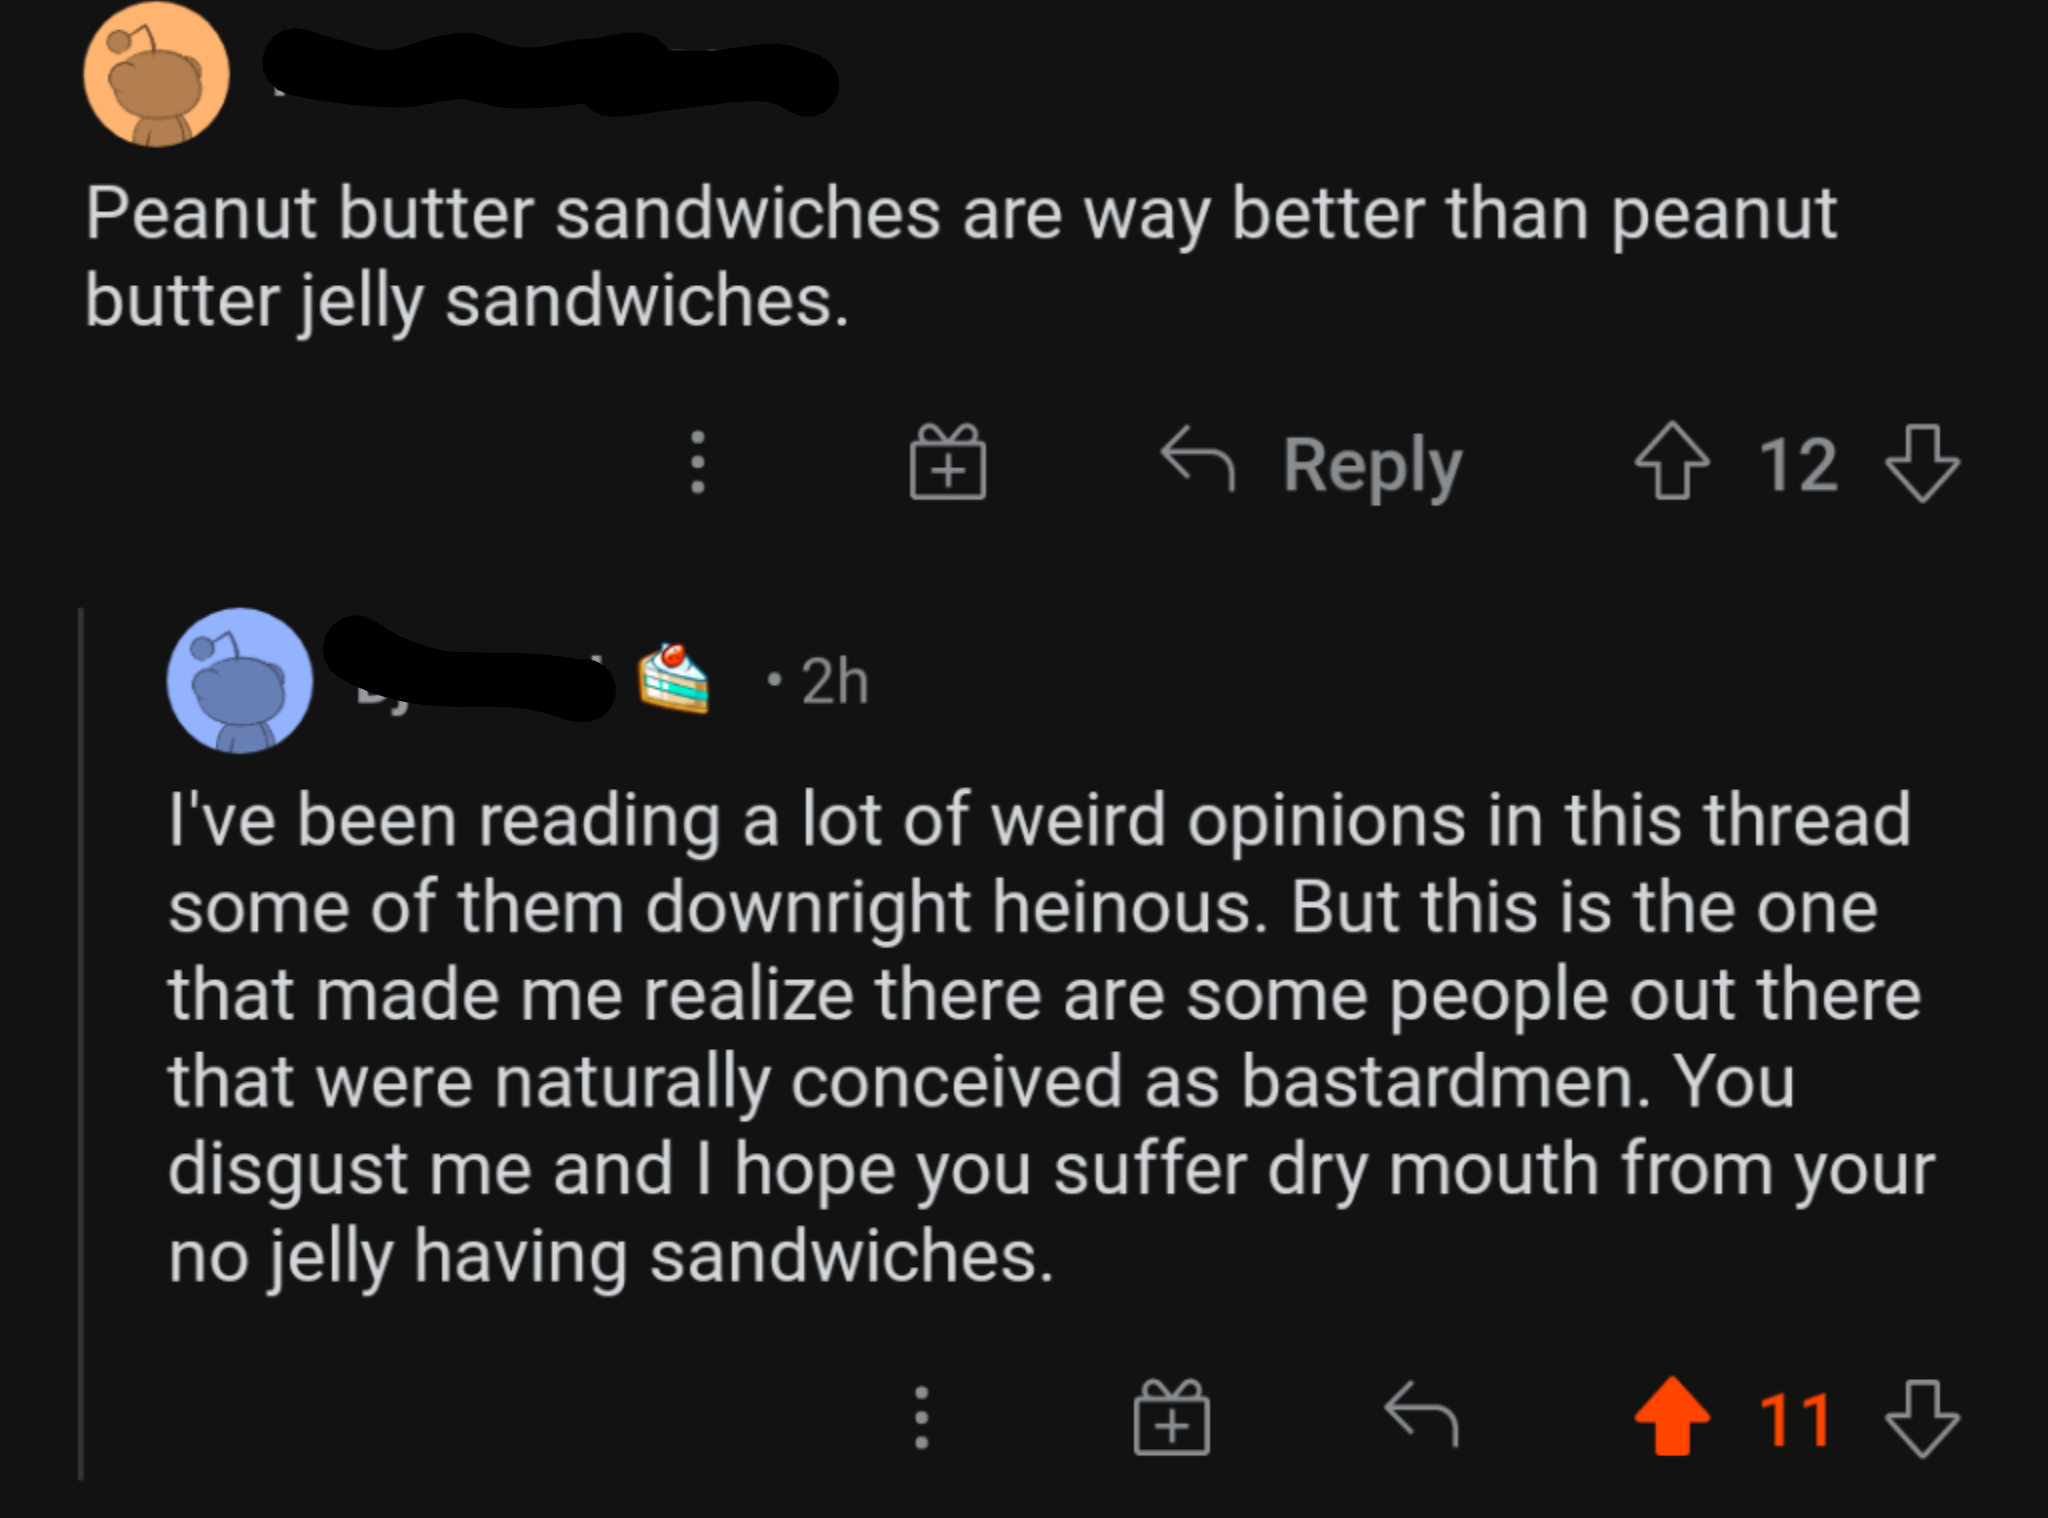 person wishing nothing but dry mouth on a person who says peanut butter anad jelly sandwiches are bad